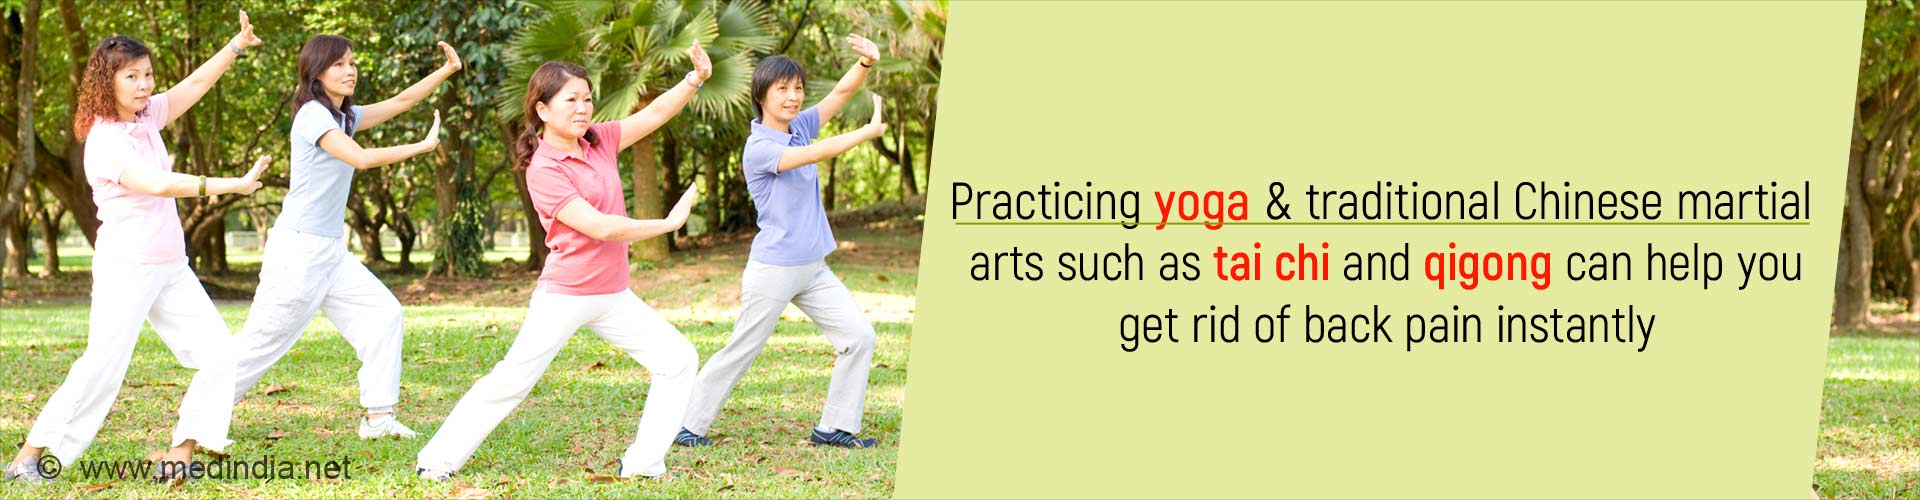 Practicing yoga and traditional Chinese martial arts such as tai chi and qigong can help you get rid of back pain instantly.